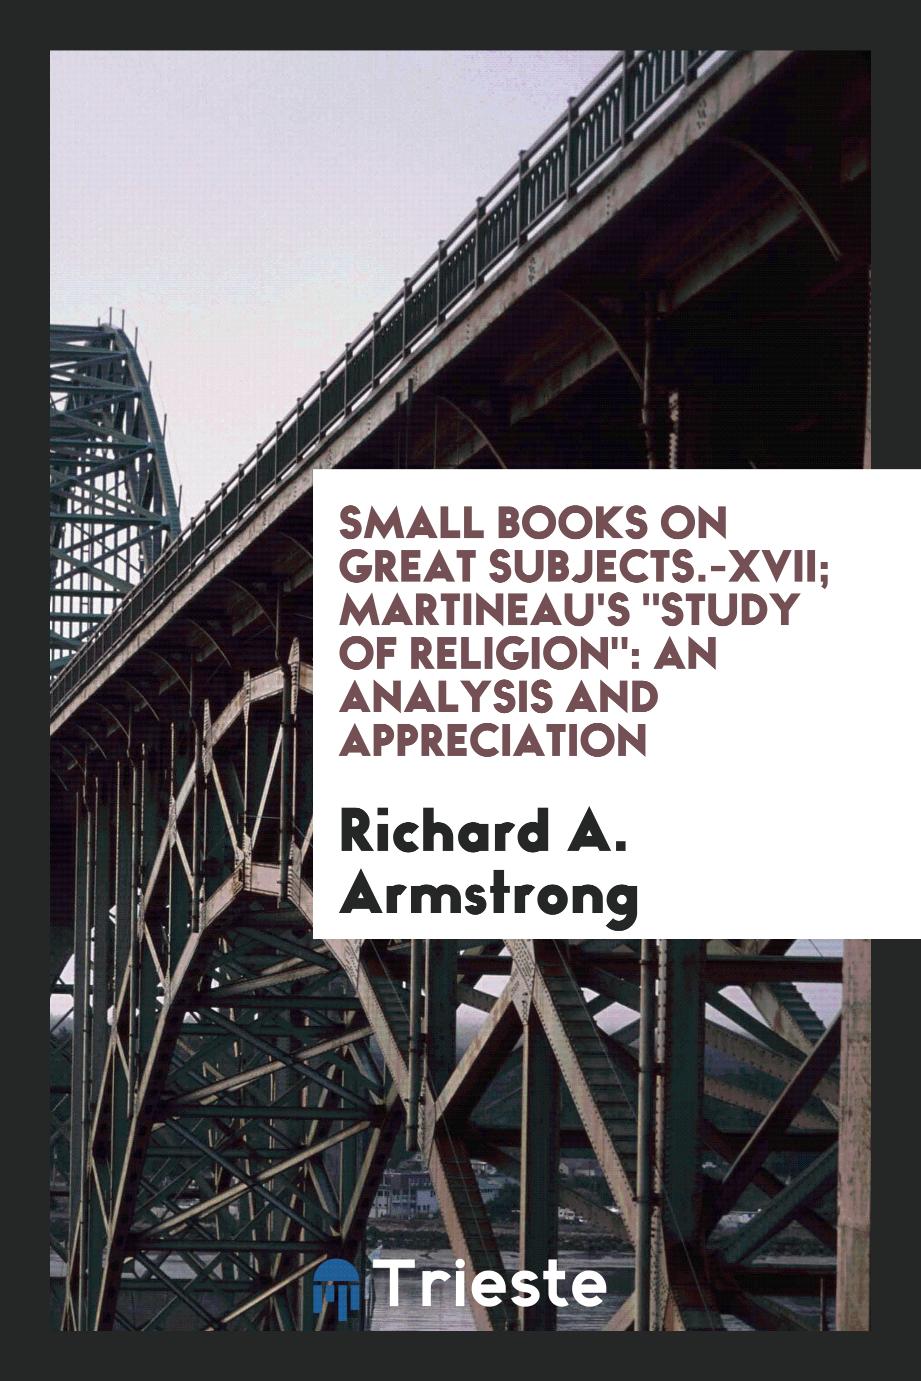 Small Books on Great Subjects.-XVII; Martineau's "Study of Religion": An Analysis and Appreciation